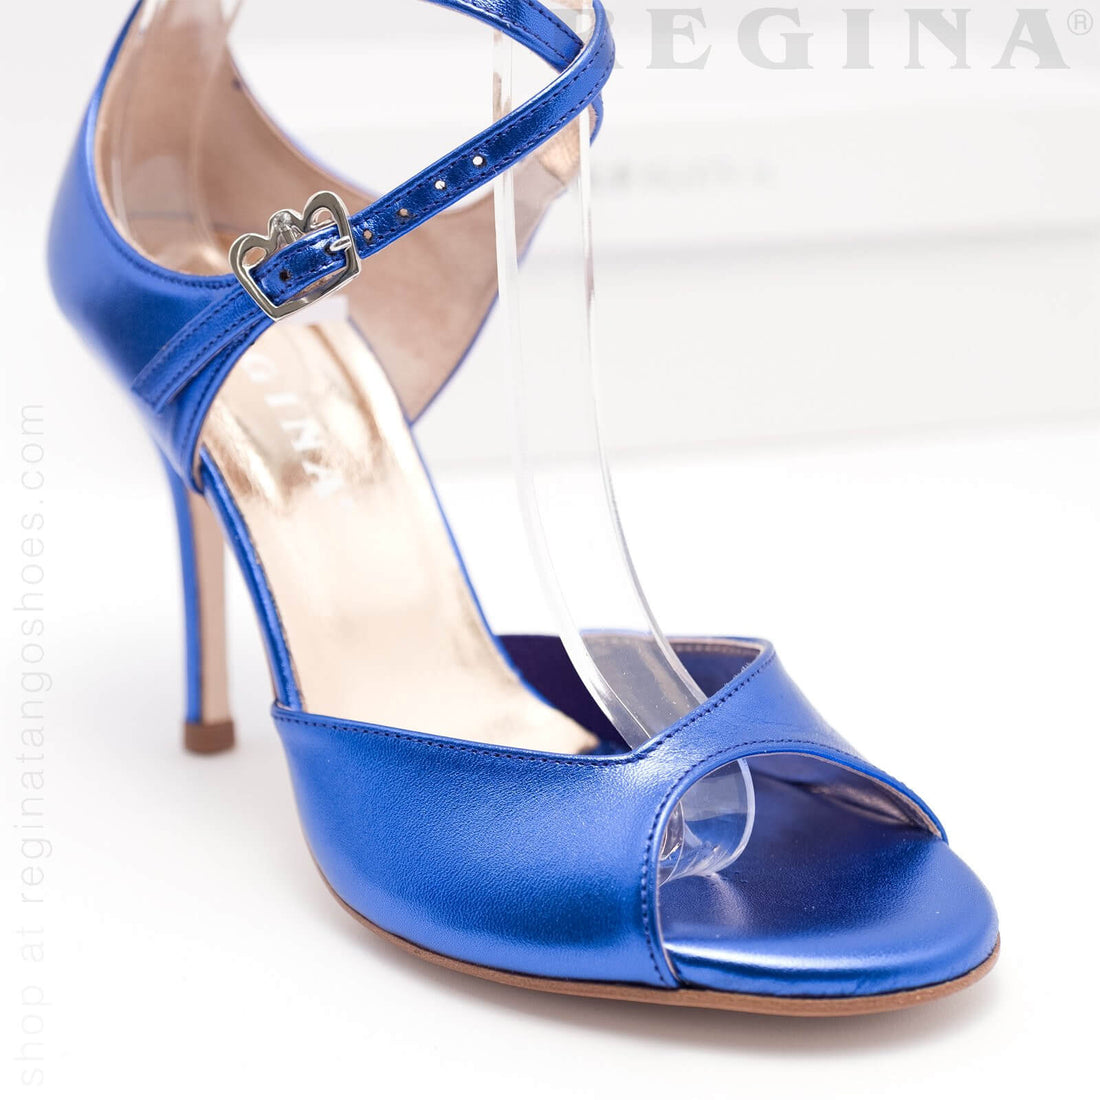 Buenos Aires- Shimmery Blue Tango Shoes Leather Sole